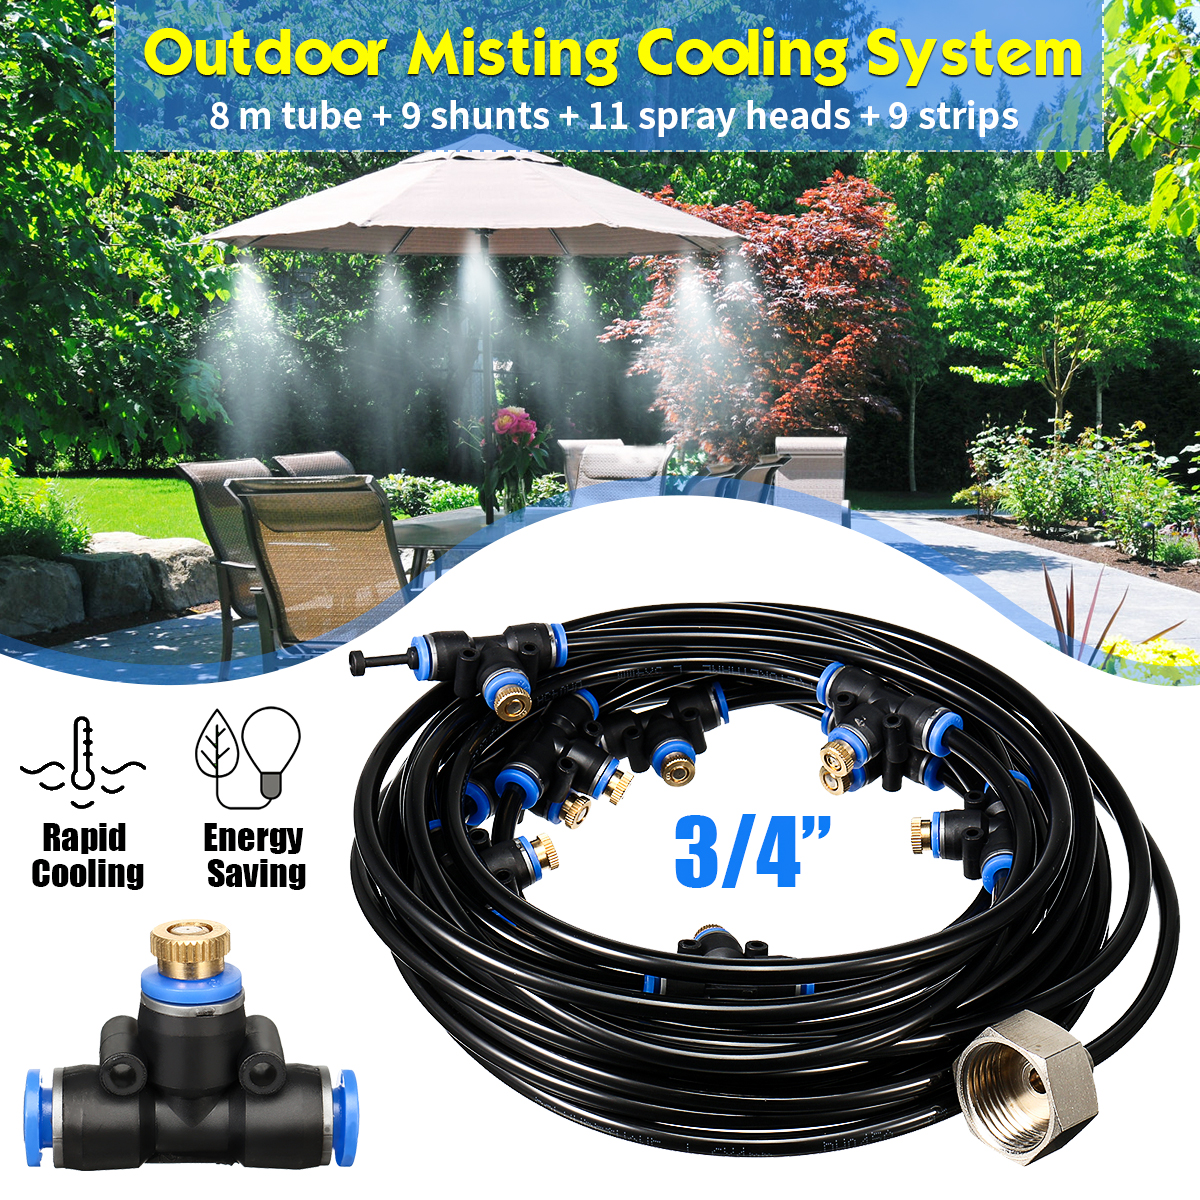 Misting-System-Fan-Cooler-Water-Cooling-Patio-Mist-Garden-Sprayer-Tool-With-Nozzles-Splitter-1591731-1